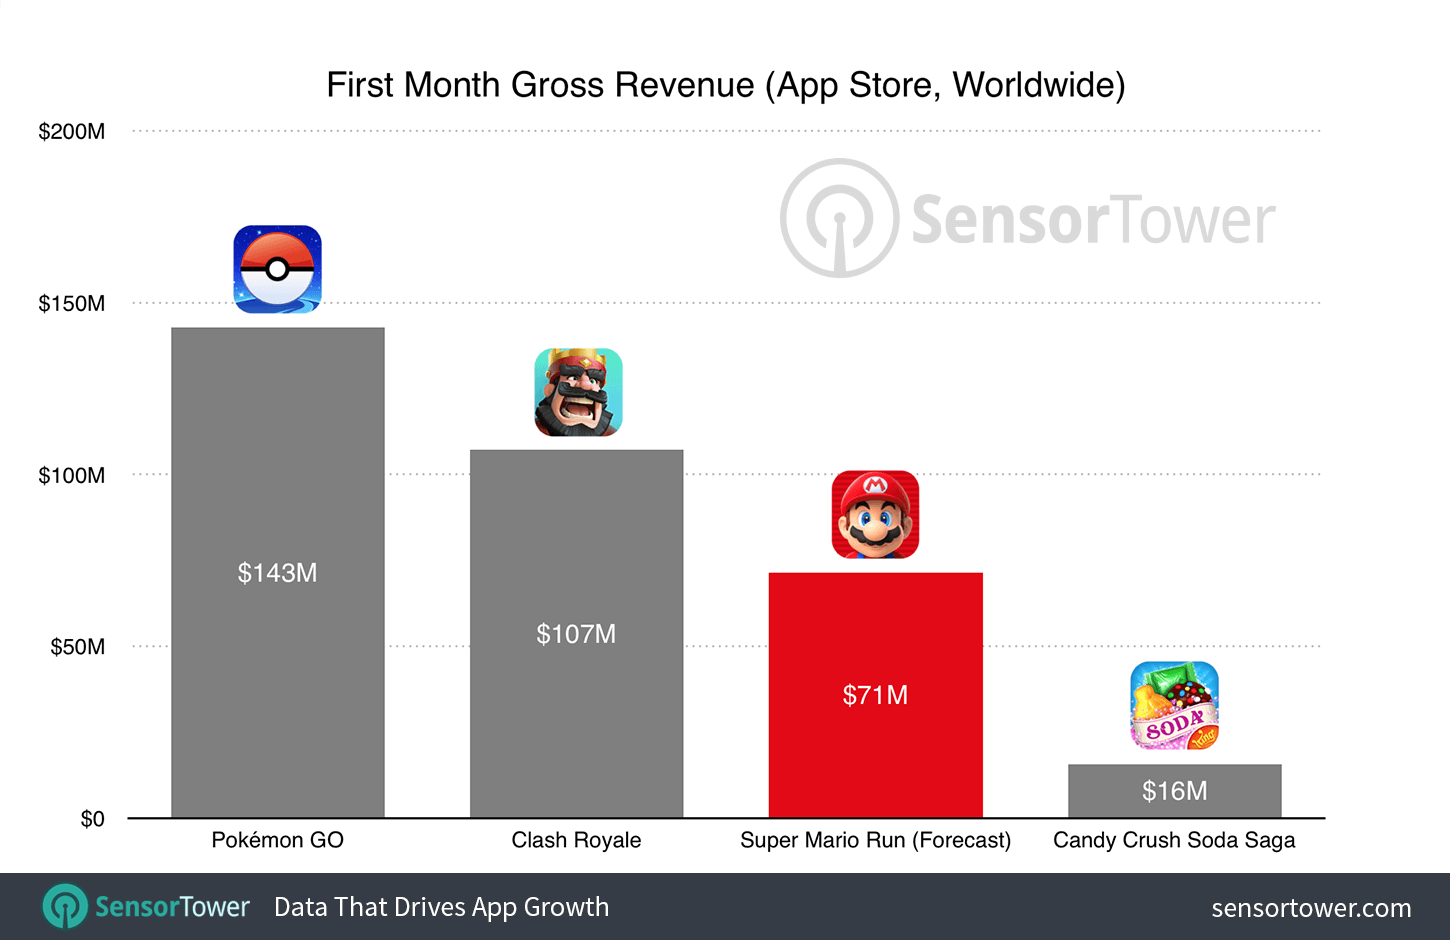 Super Mario Run will likely not much Clash Royale or Pokémon Go's money-making power.